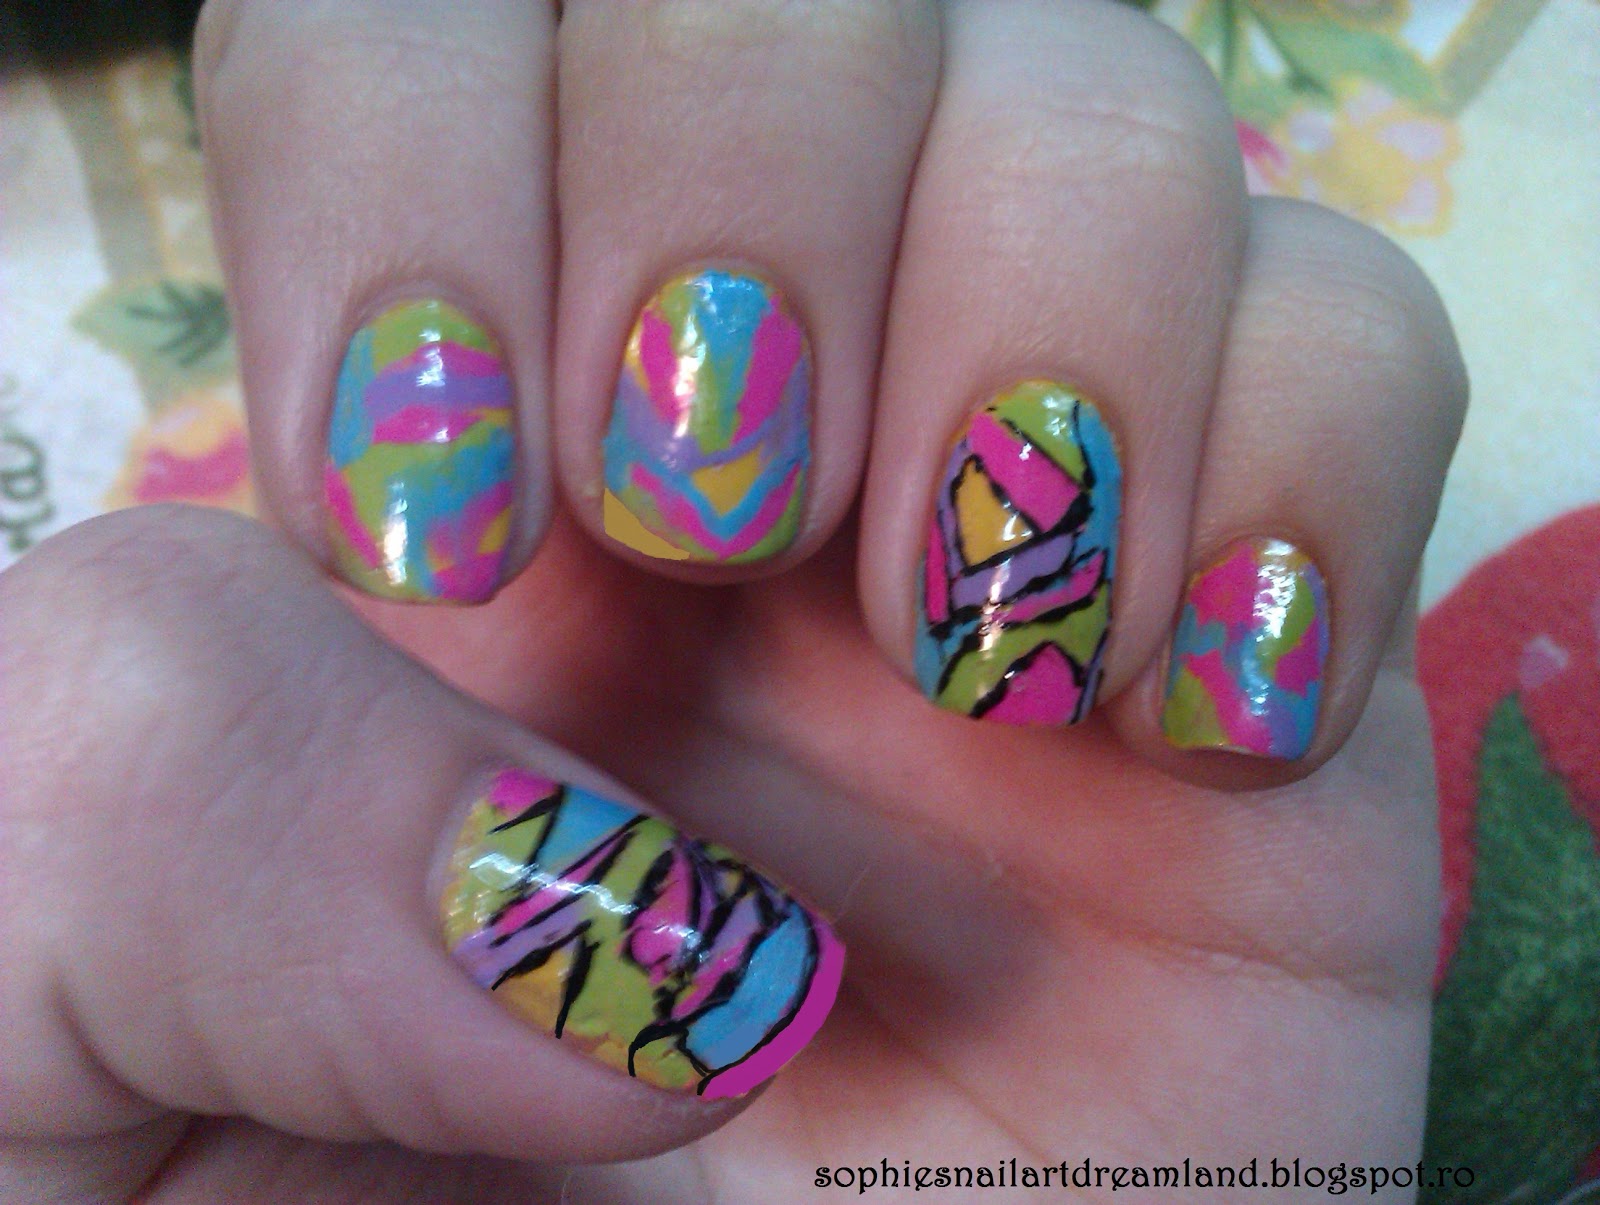 Psychedelic dream | Sophie's Nail Art Dreamland